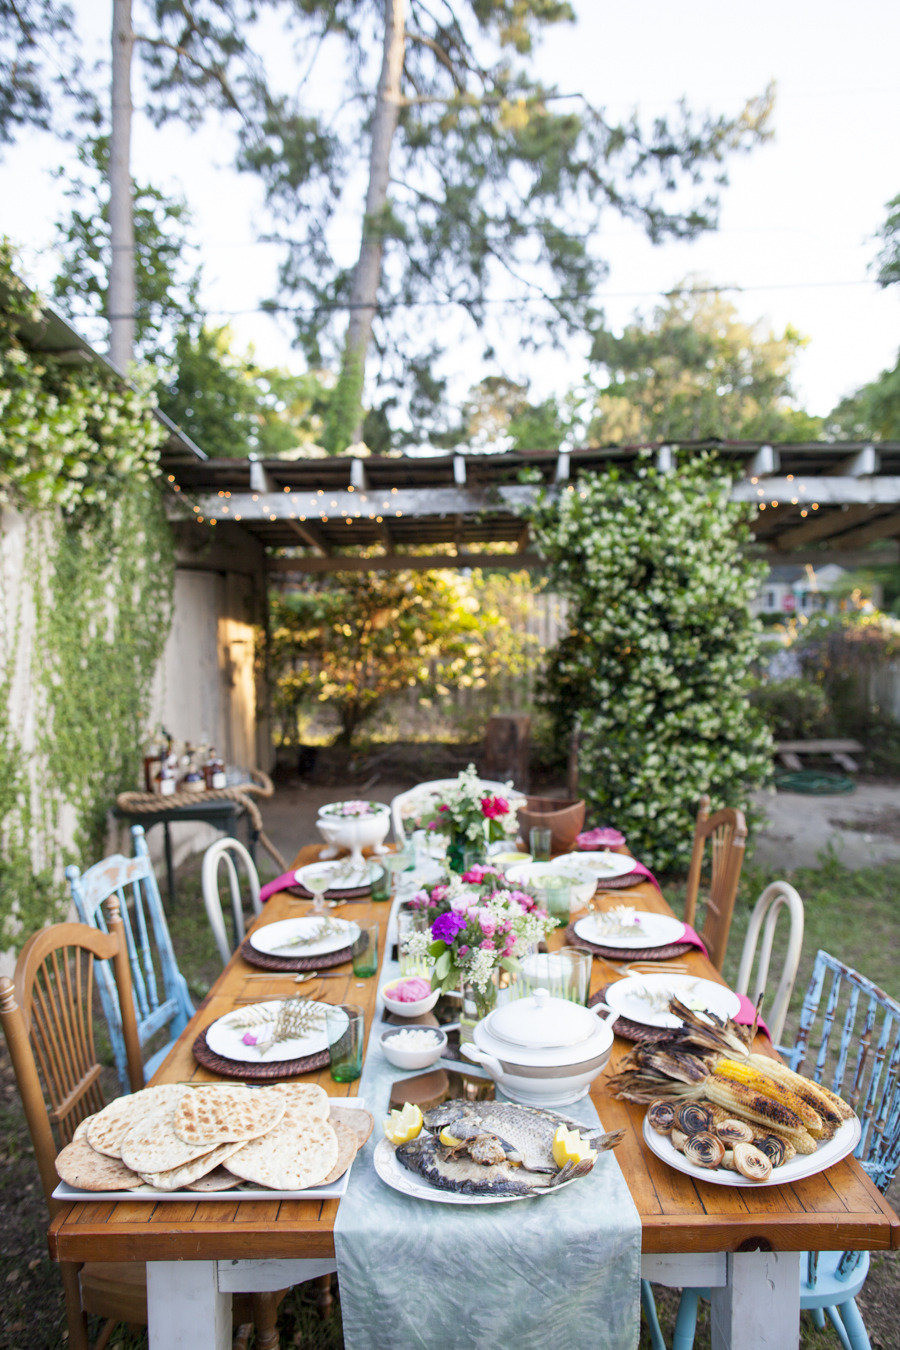 Backyard Summer Party Decorating Ideas
 50 Outdoor Party Ideas You Should Try Out This Summer